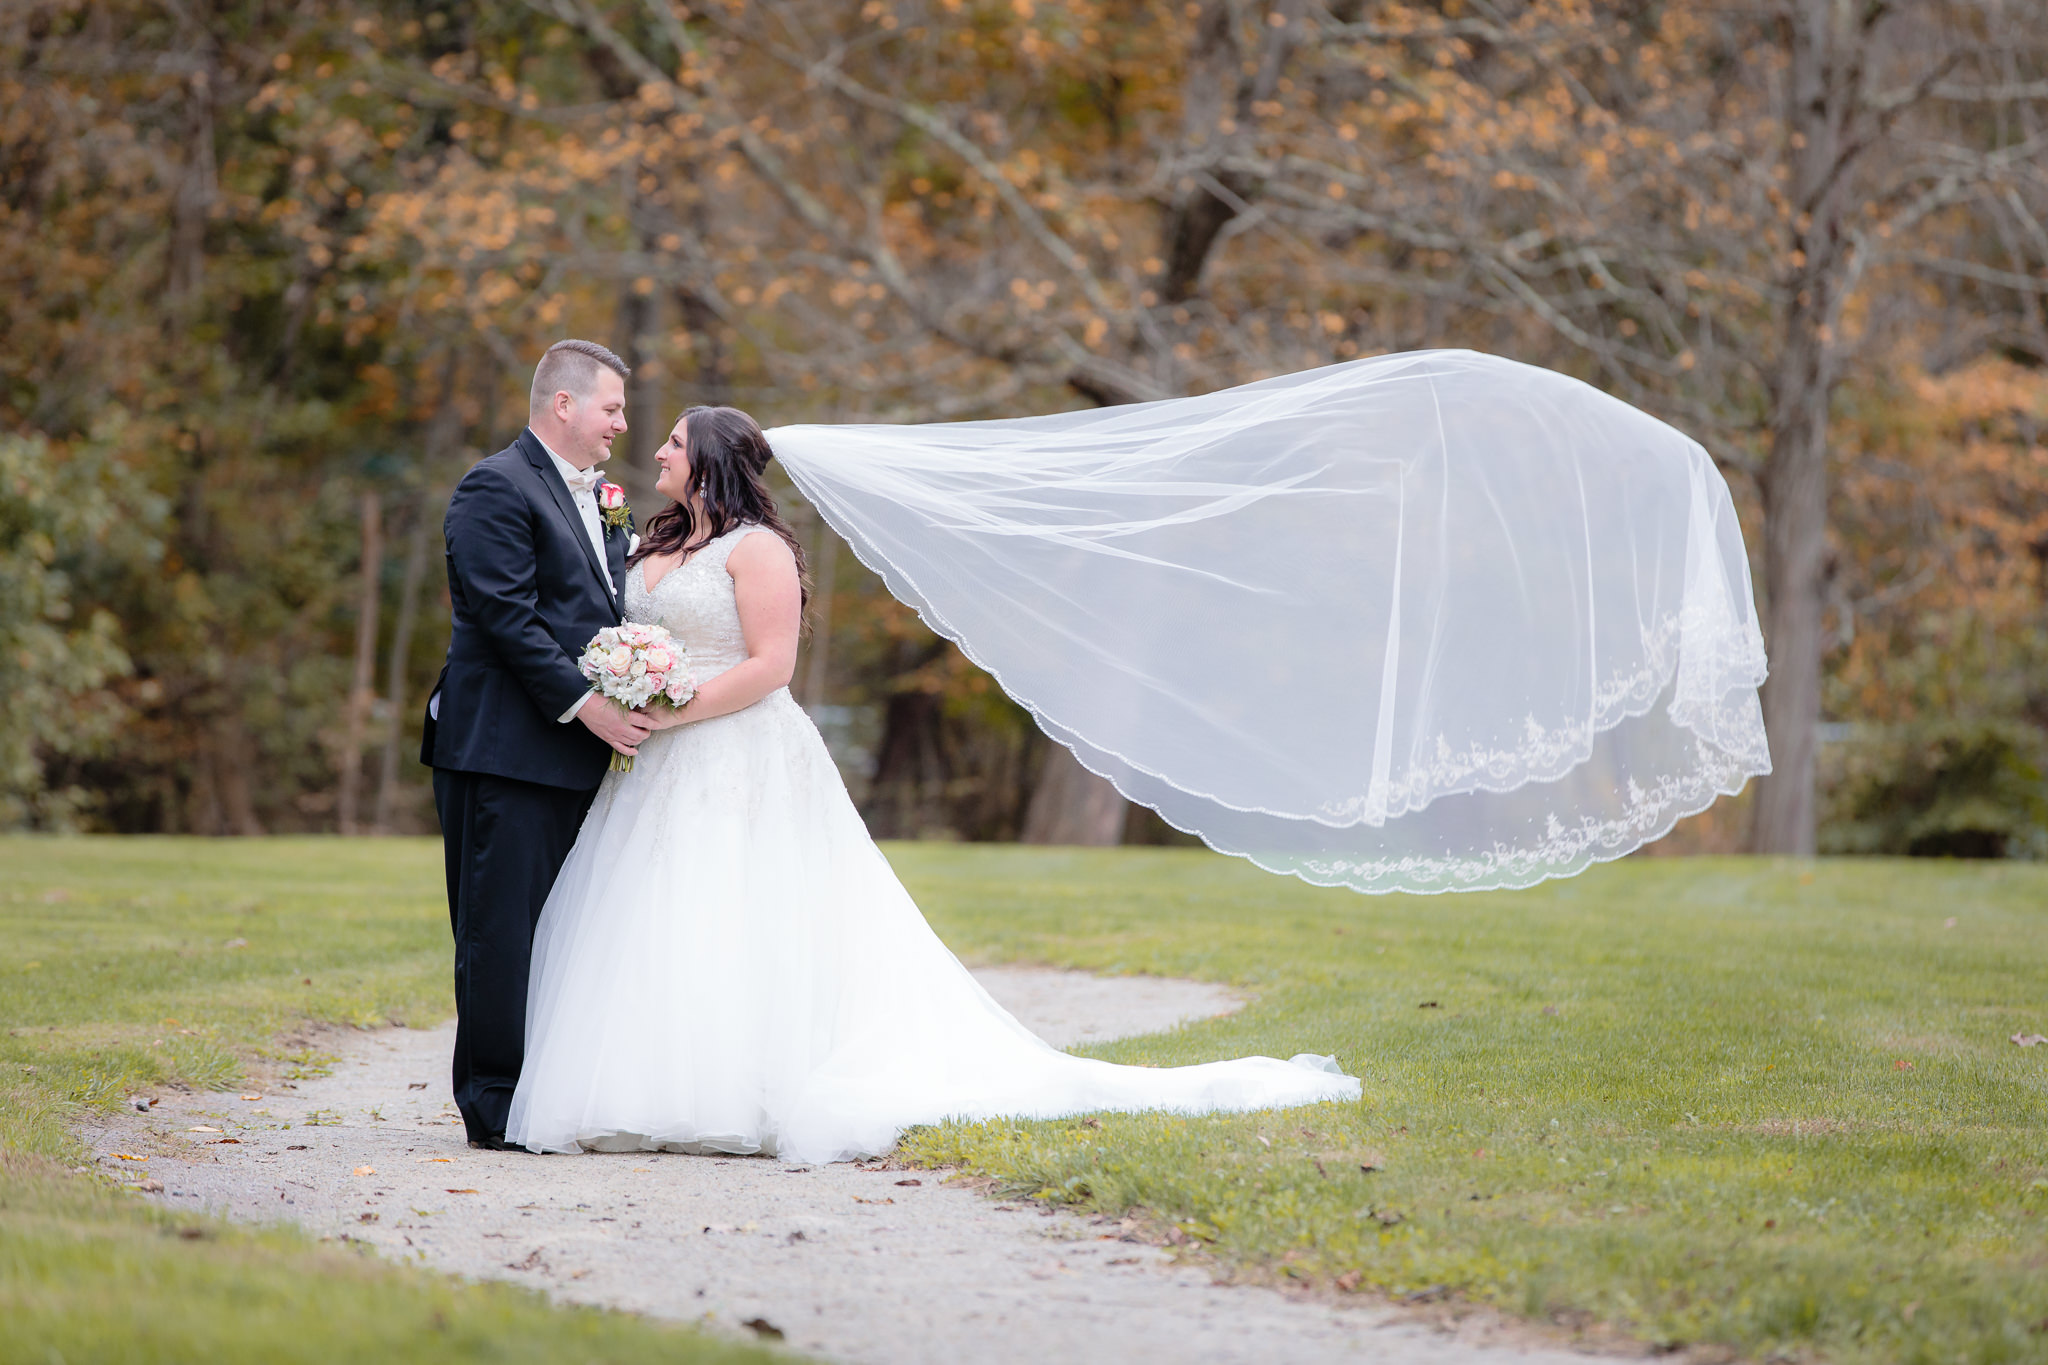 Bride's cathedral veil blows in the wind during portraits at Olson Park